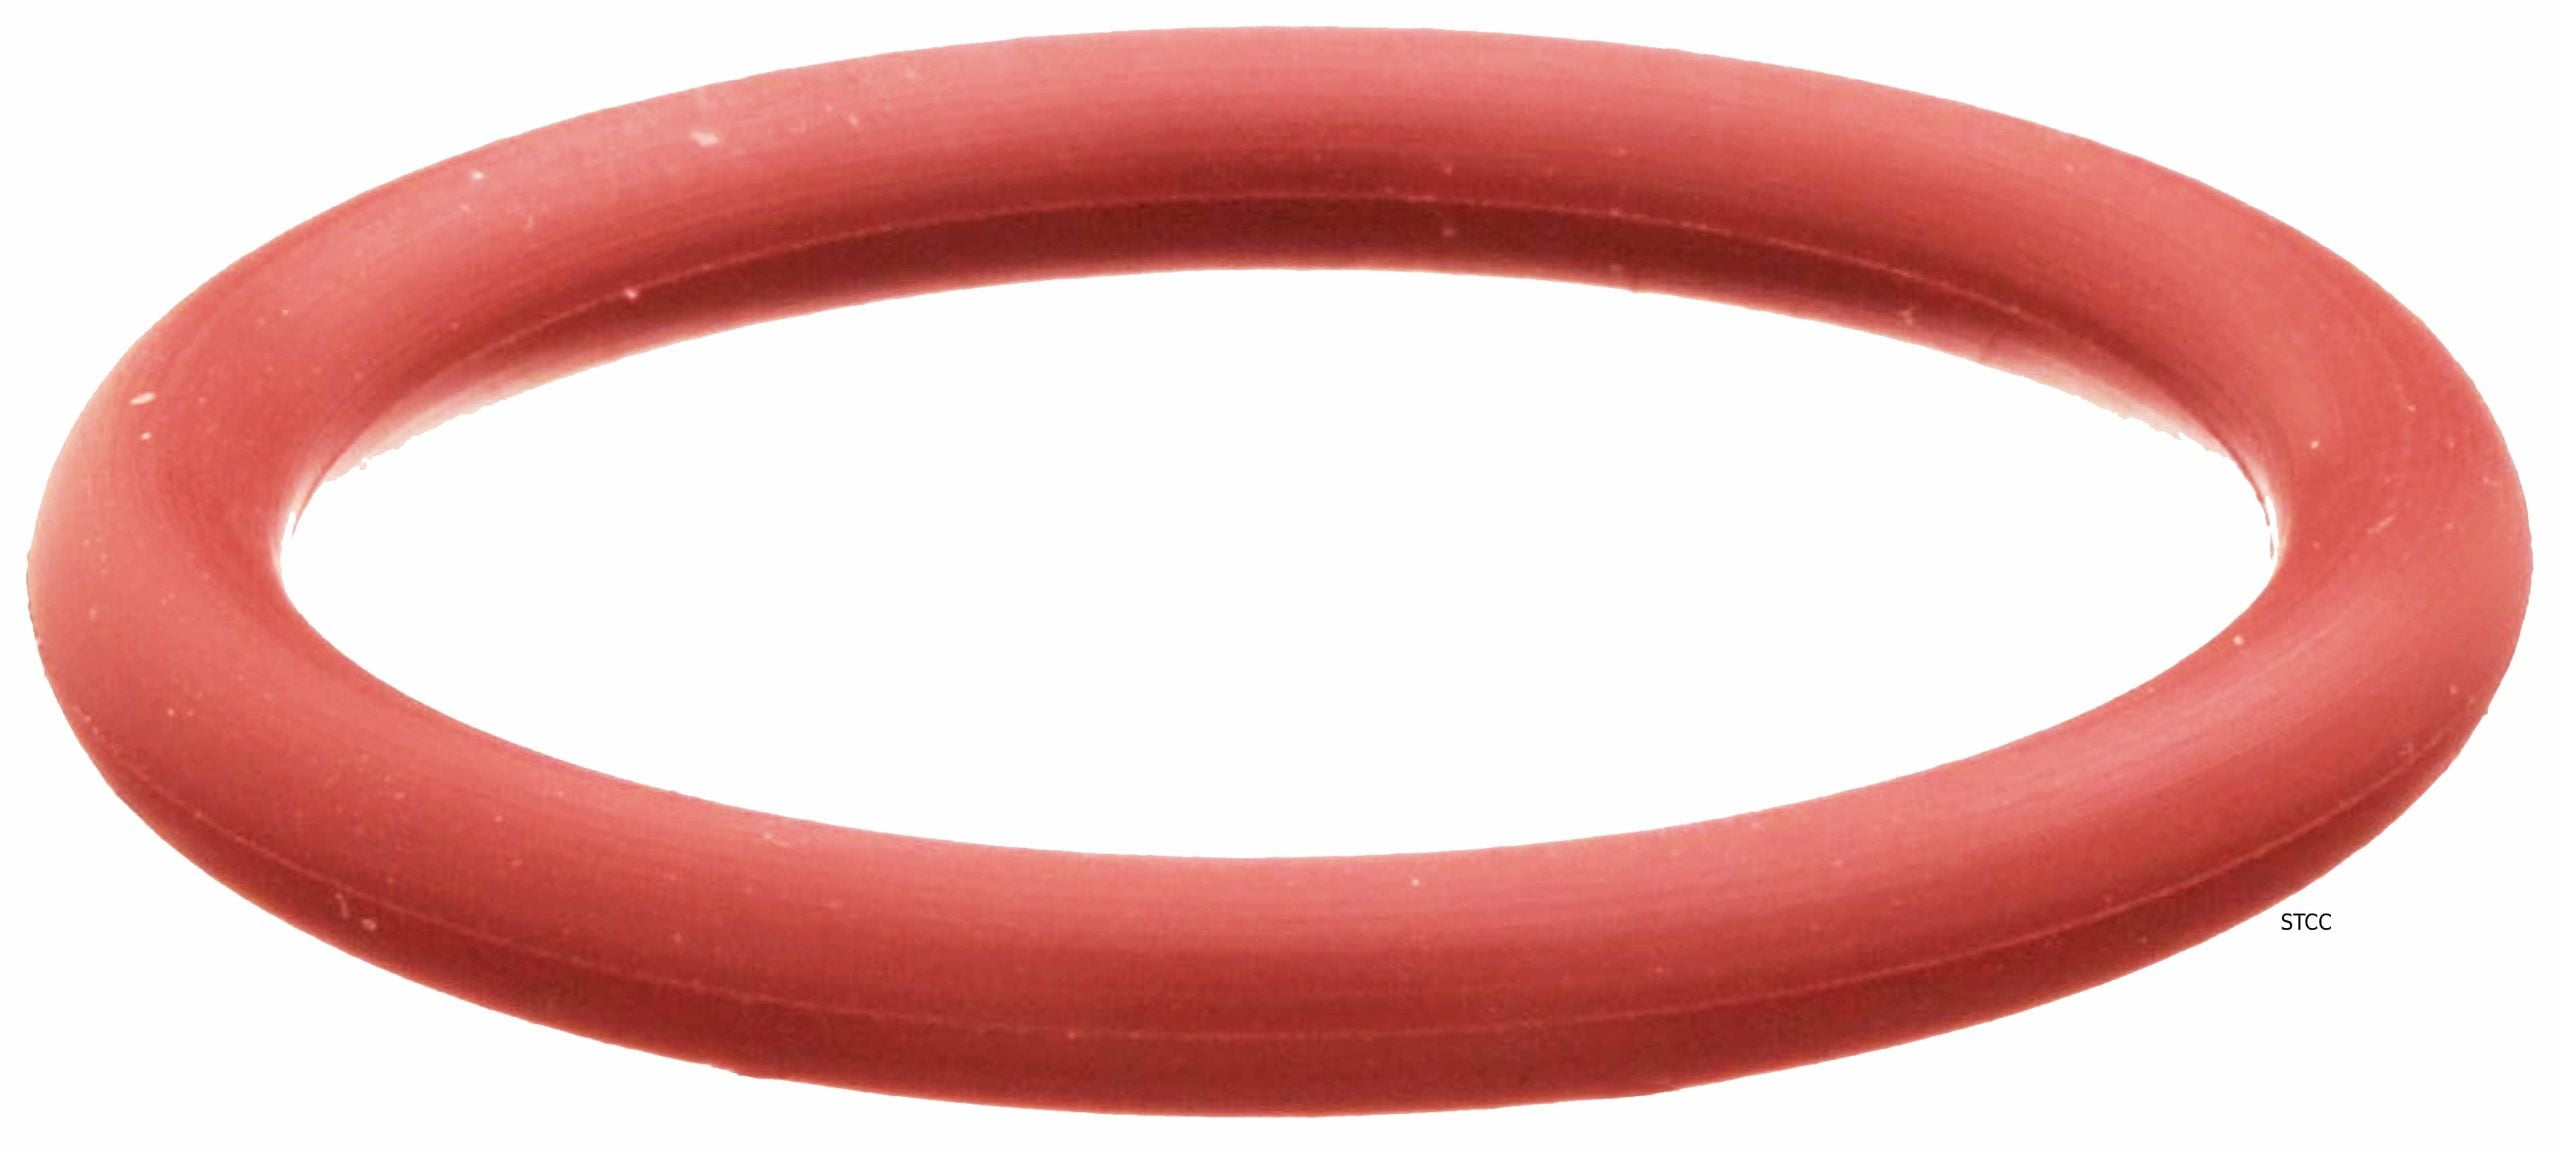 Pack of 25 337 Silicone O-Ring 70A Durometer Red 